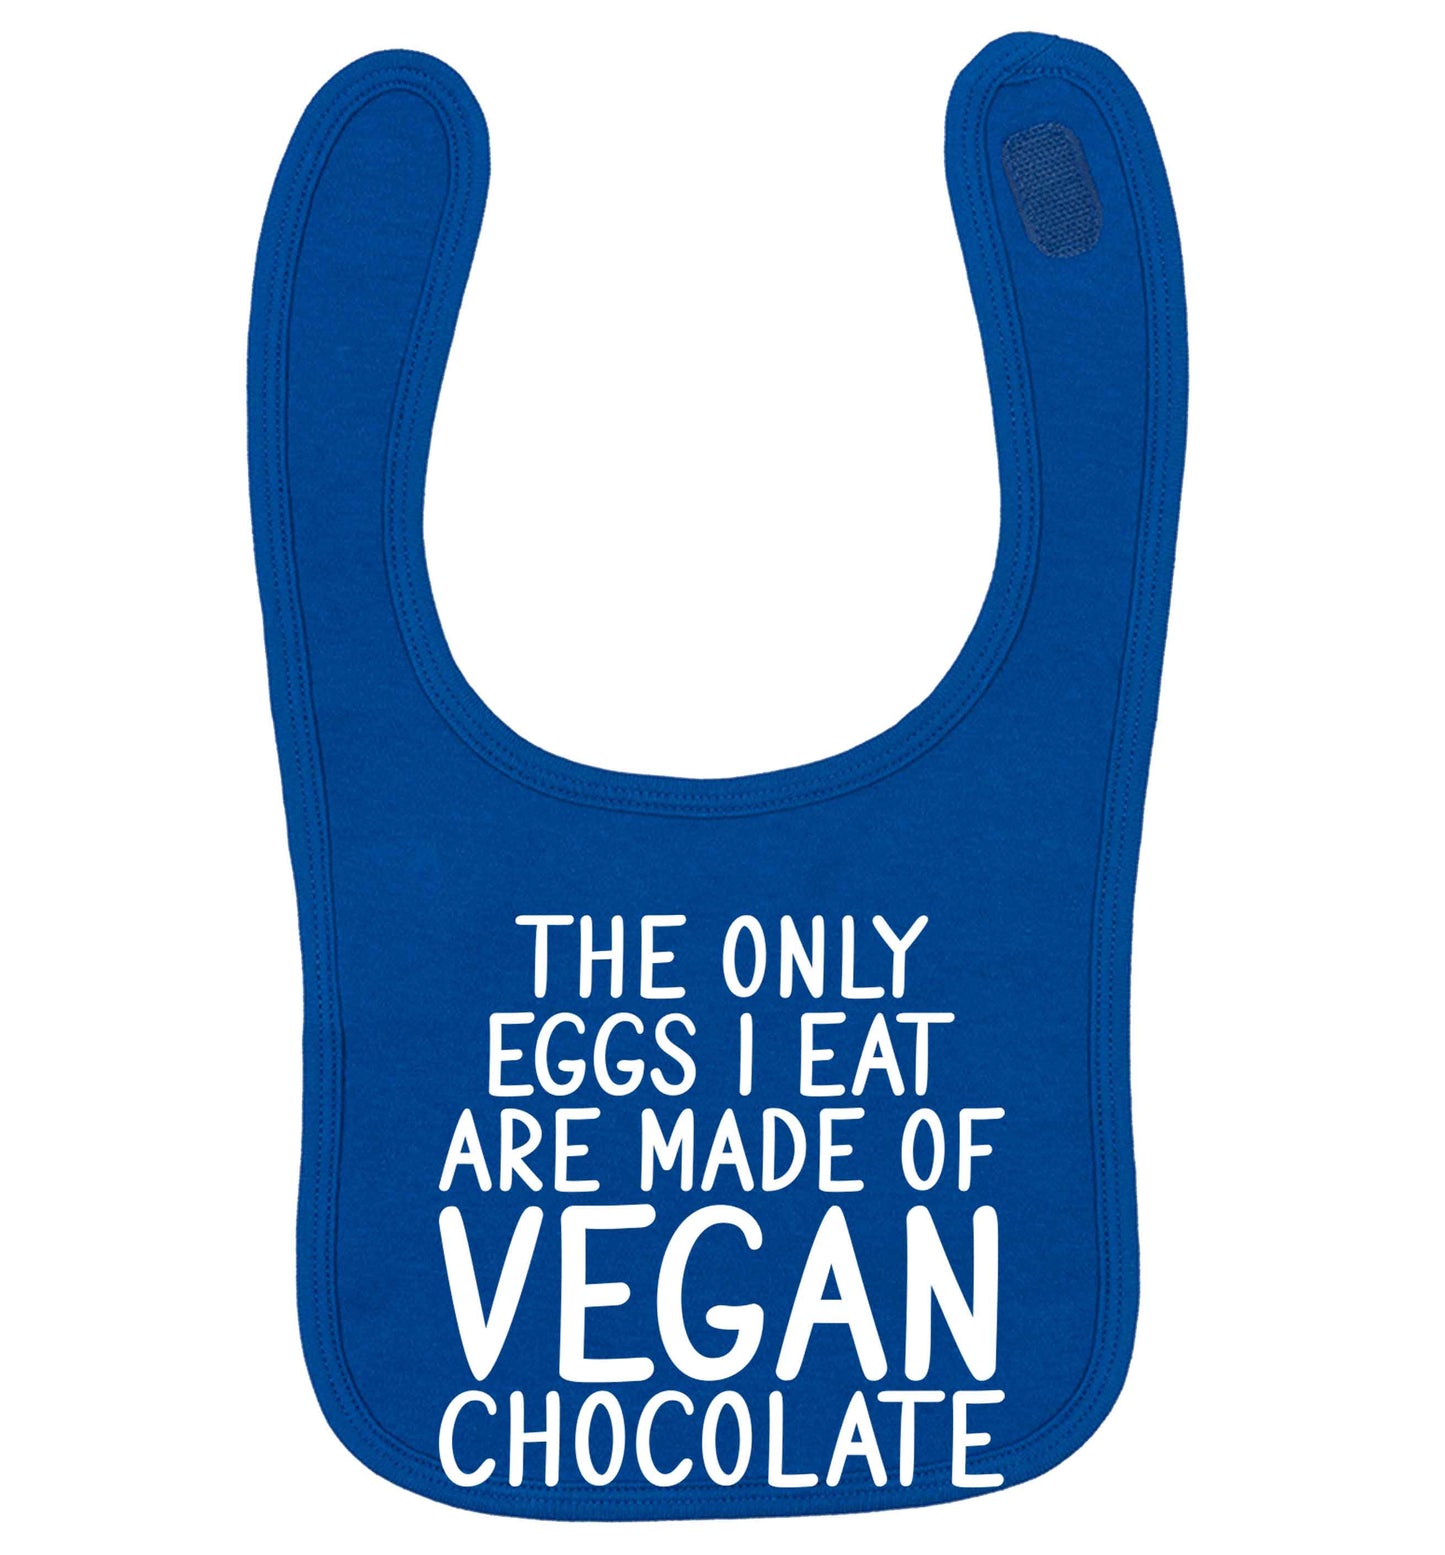 The only eggs I eat are made of vegan chocolate royal blue baby bib